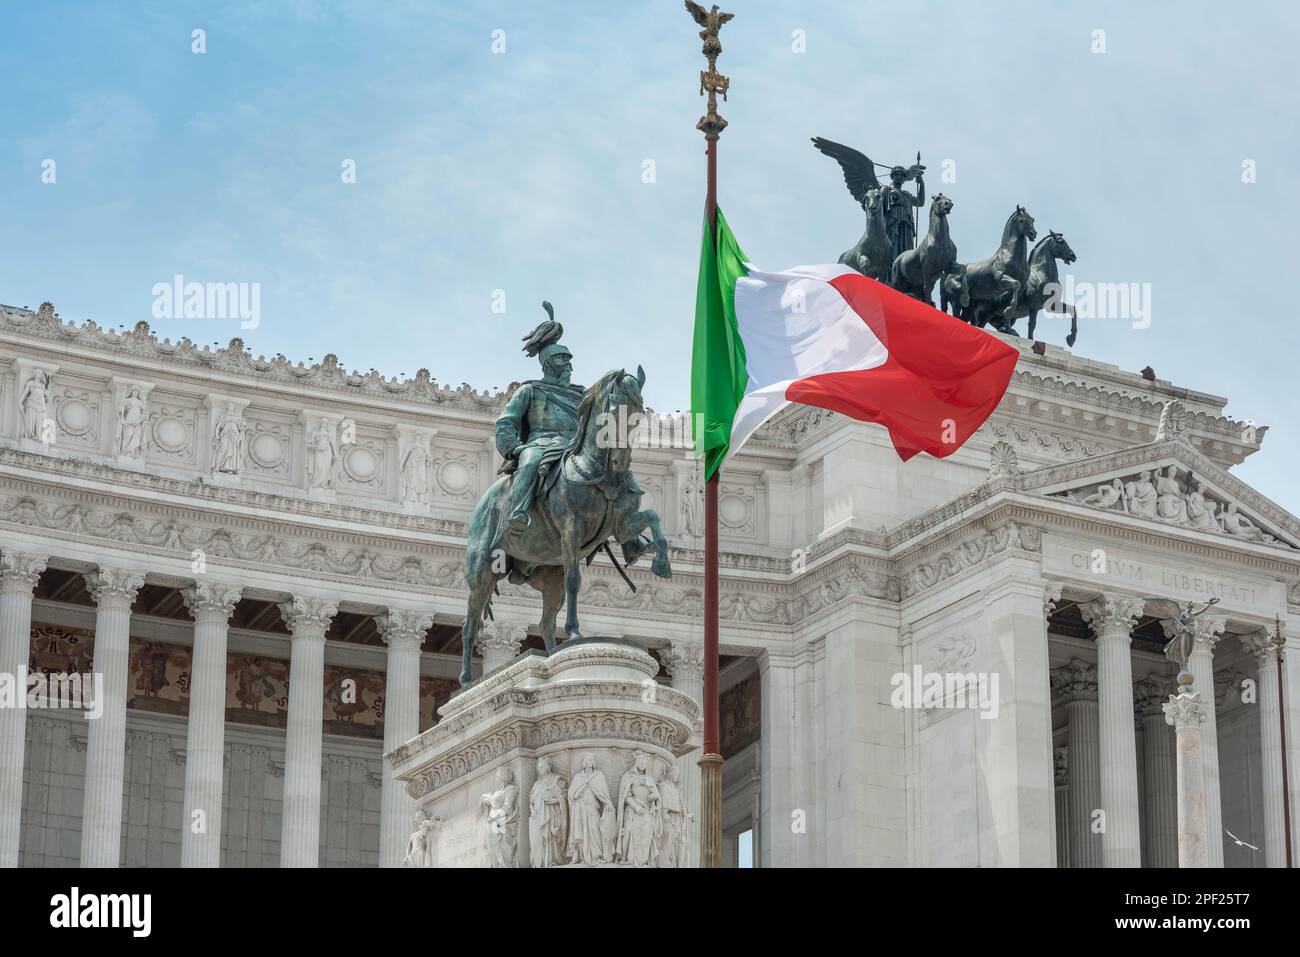 Italy flag city landmark, view of the national flag of Italy sited at the Vittorio Emanuele Monument in the historic centre of Rome, Italy Stock Photo